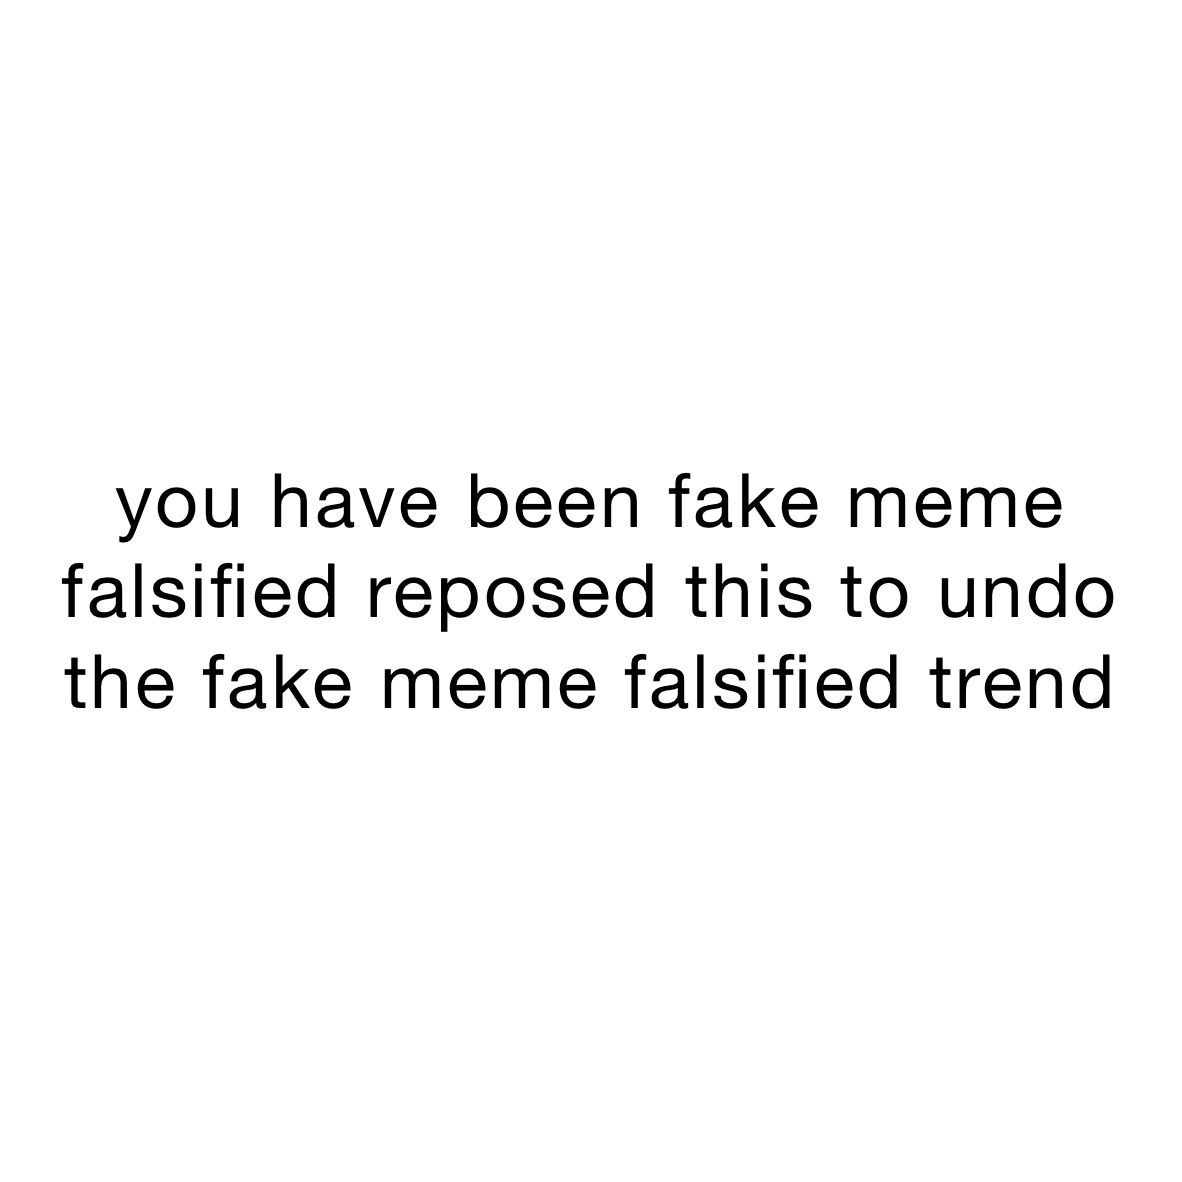 you have been fake meme falsified reposed this to undo the fake meme falsified trend